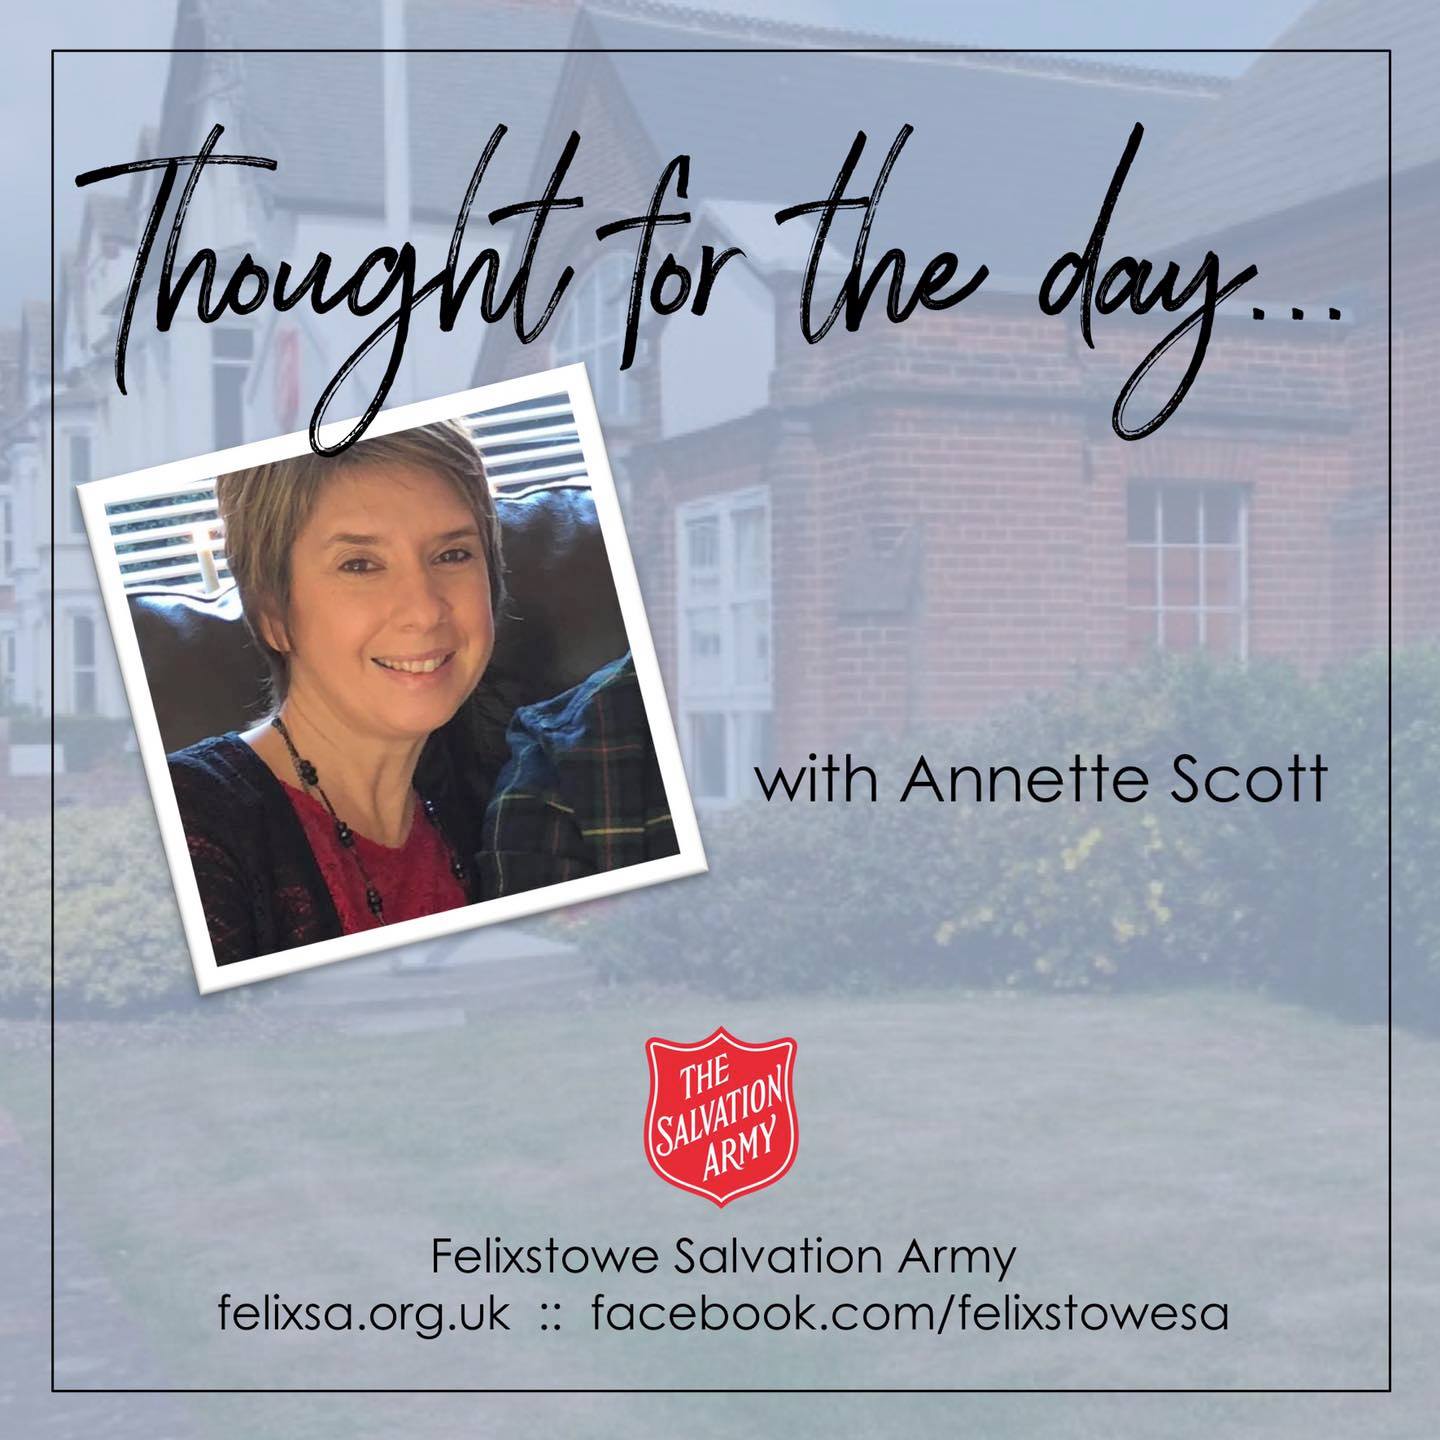 Thought for the Day with Annette Scott